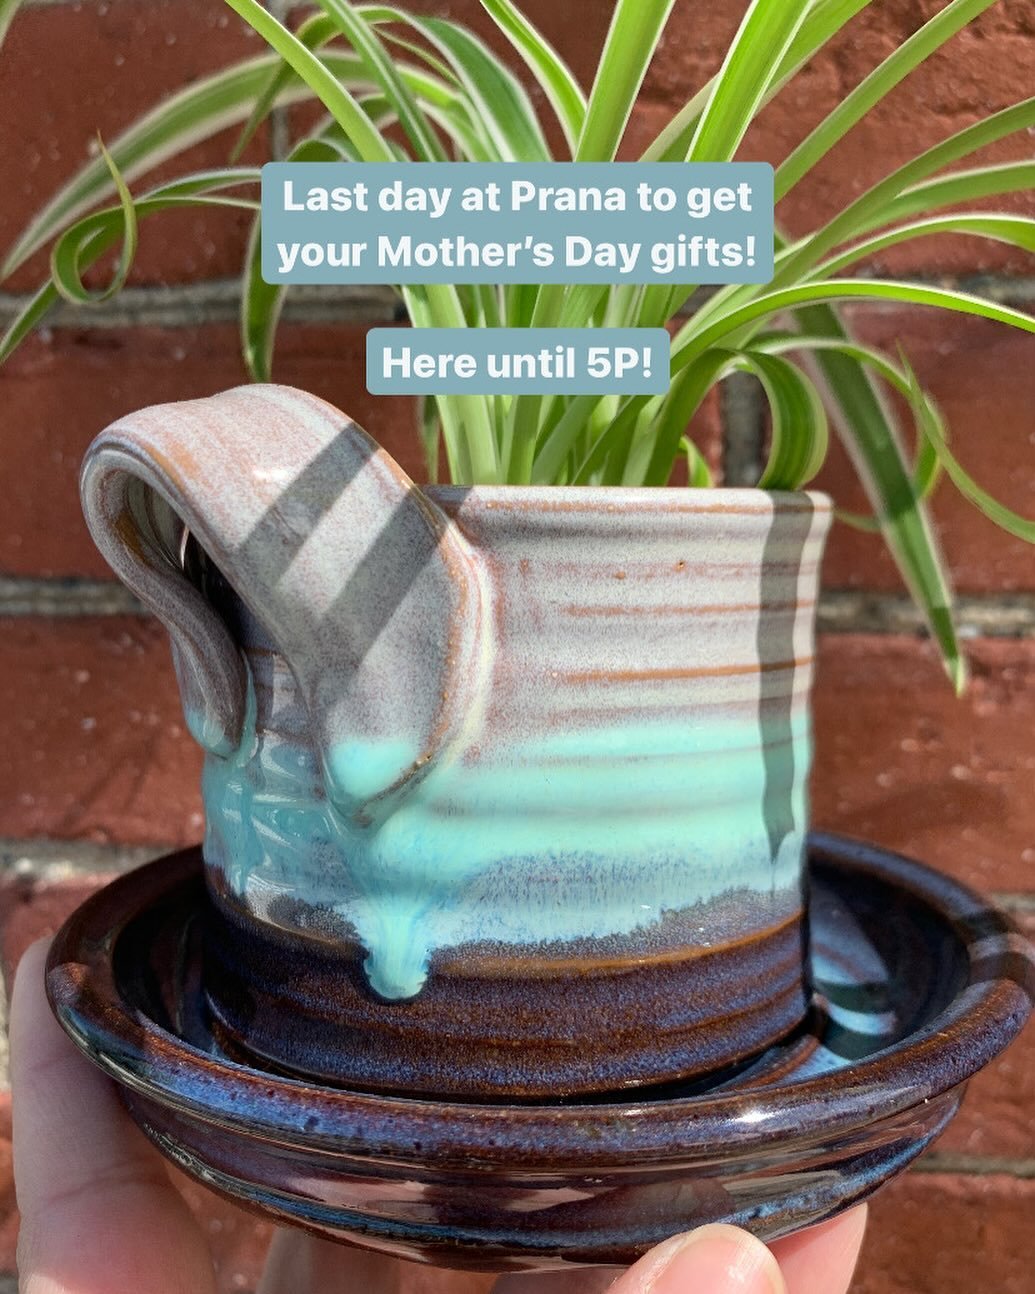 ✨Saturday I will be popping up for my hometown craft fair! See you in Granby 9-3p! 

#smallbusiness #shoplocal #queerowned #lgbtq #houseplants #greenvibes #prana #newton #boston #handmade #ecofriendly #local